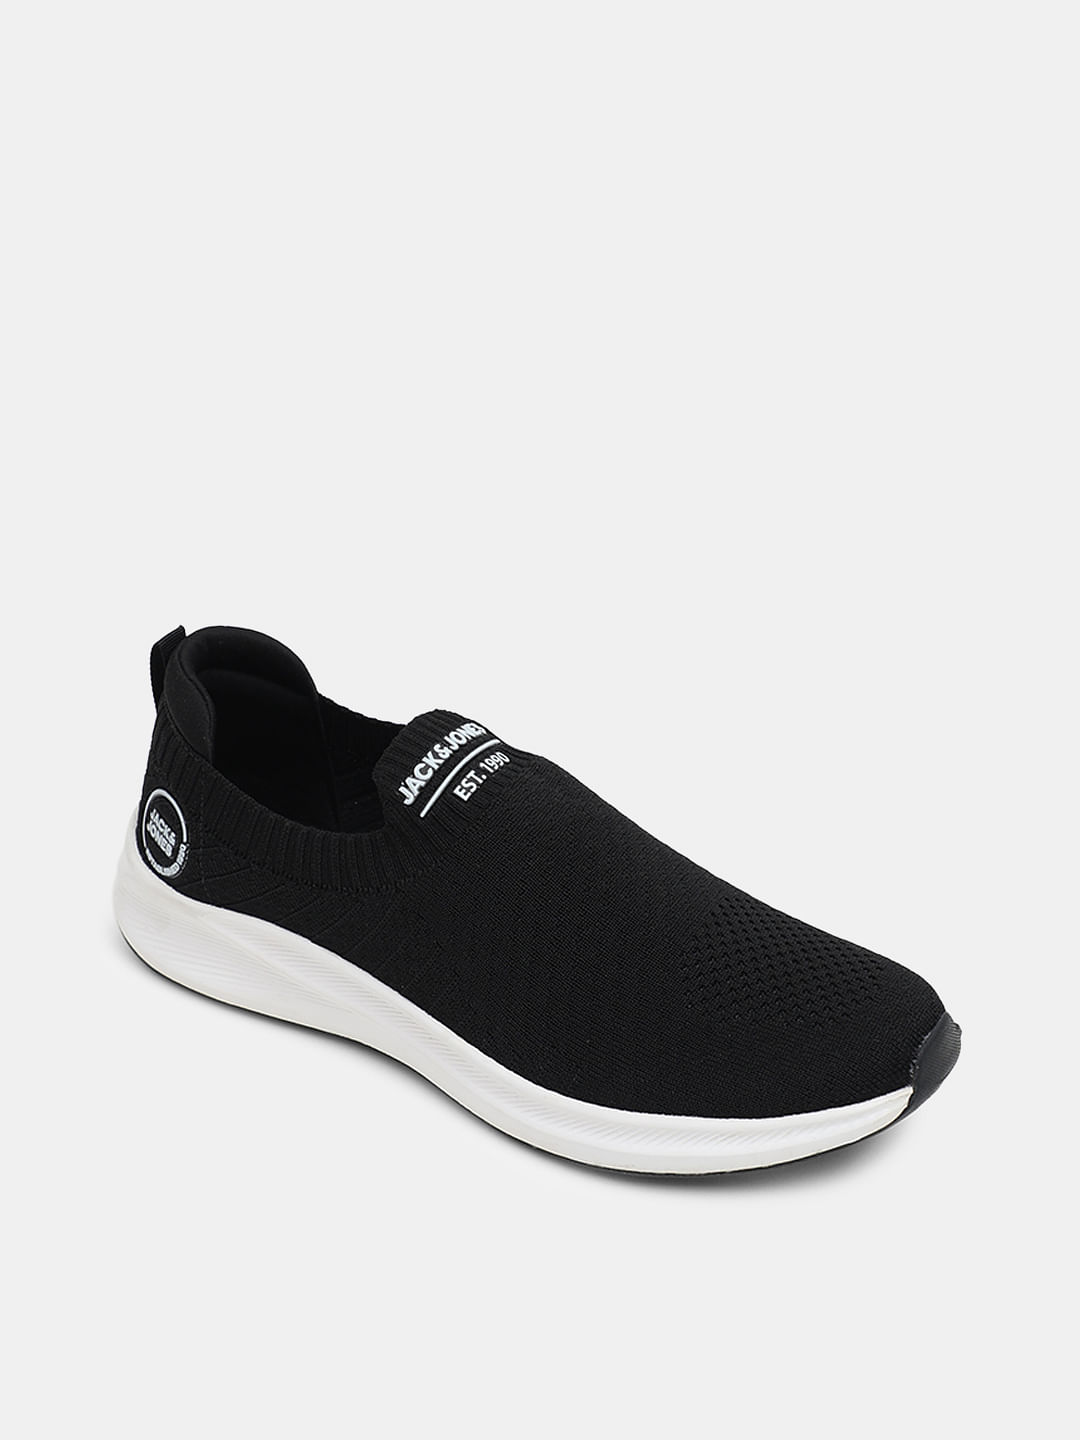 Reebok Mens Running Stride Slip-Ons (Black, Chalk Green, Size - 9) in Delhi  at best price by Delco Shoes - Justdial